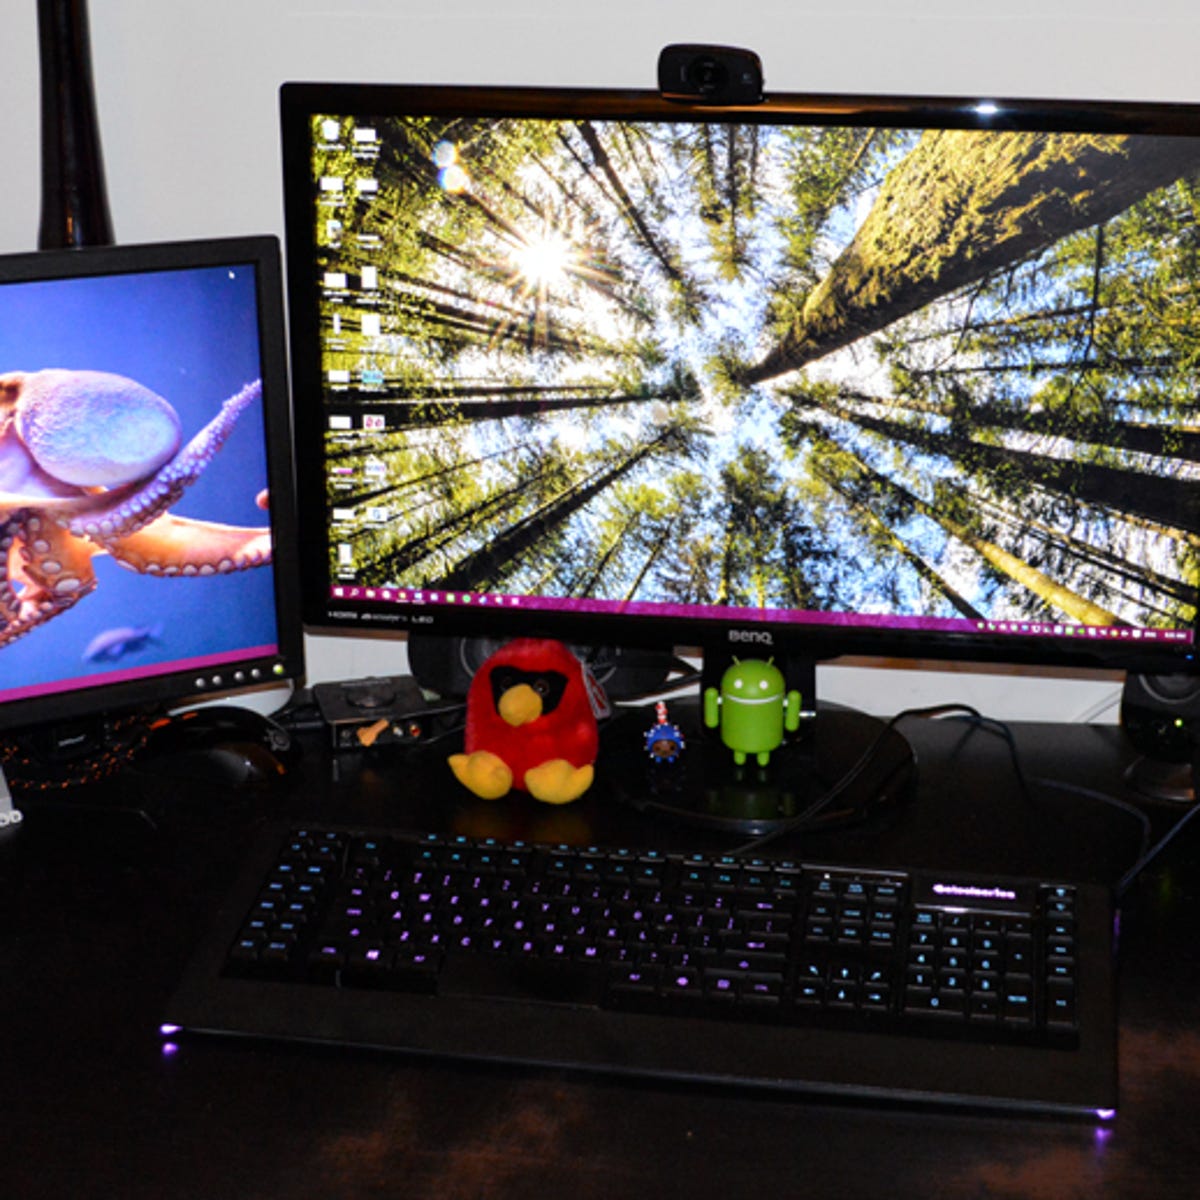 How to set different wallpapers for multiple monitors in Windows 10 - CNET